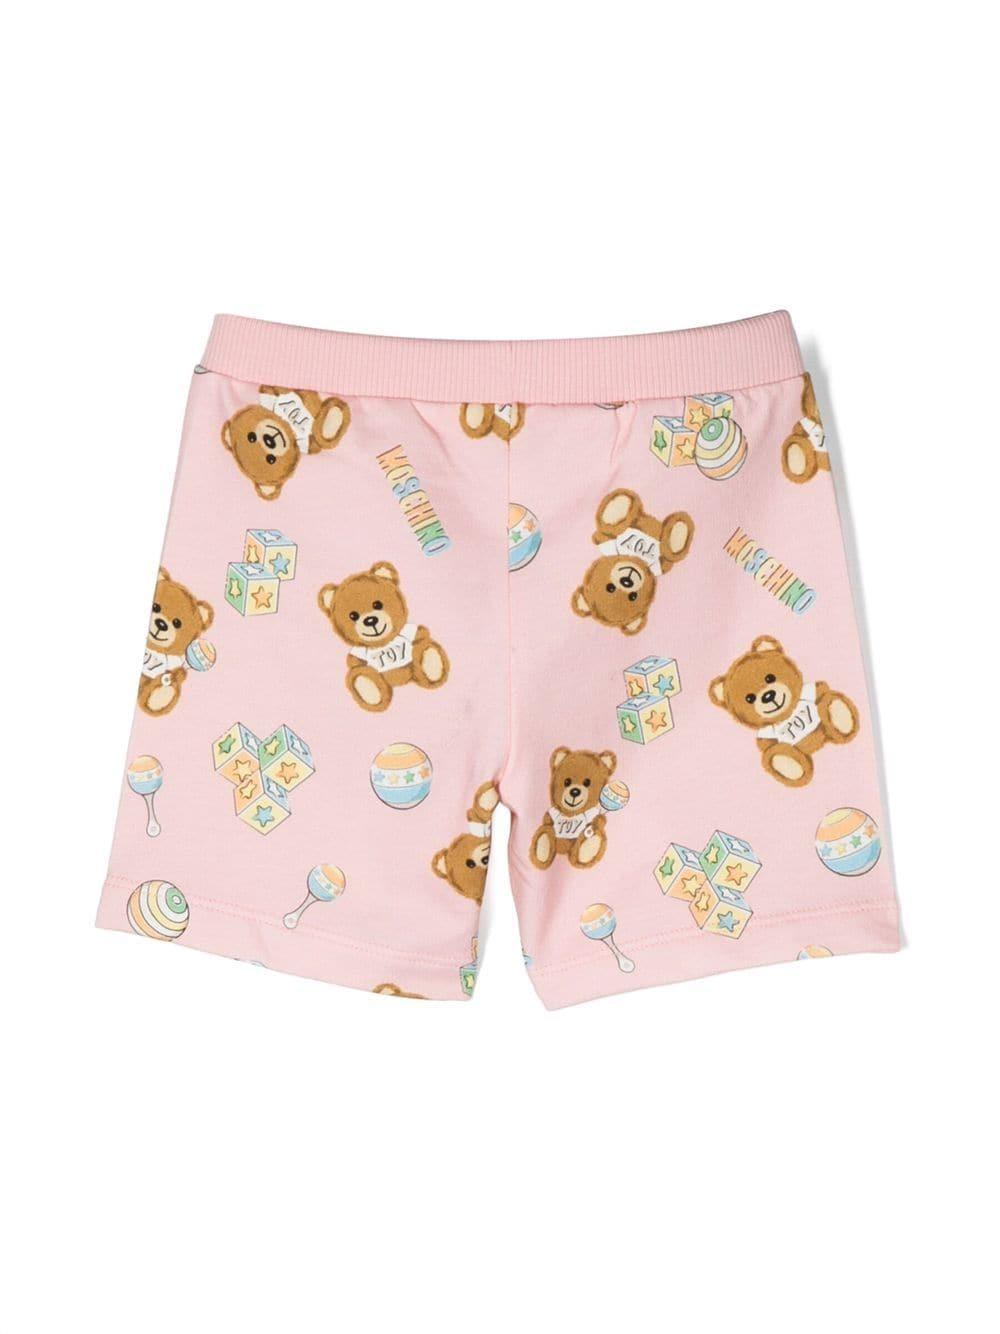 Moschino Kids all-over teddy bear print shorts - Pink